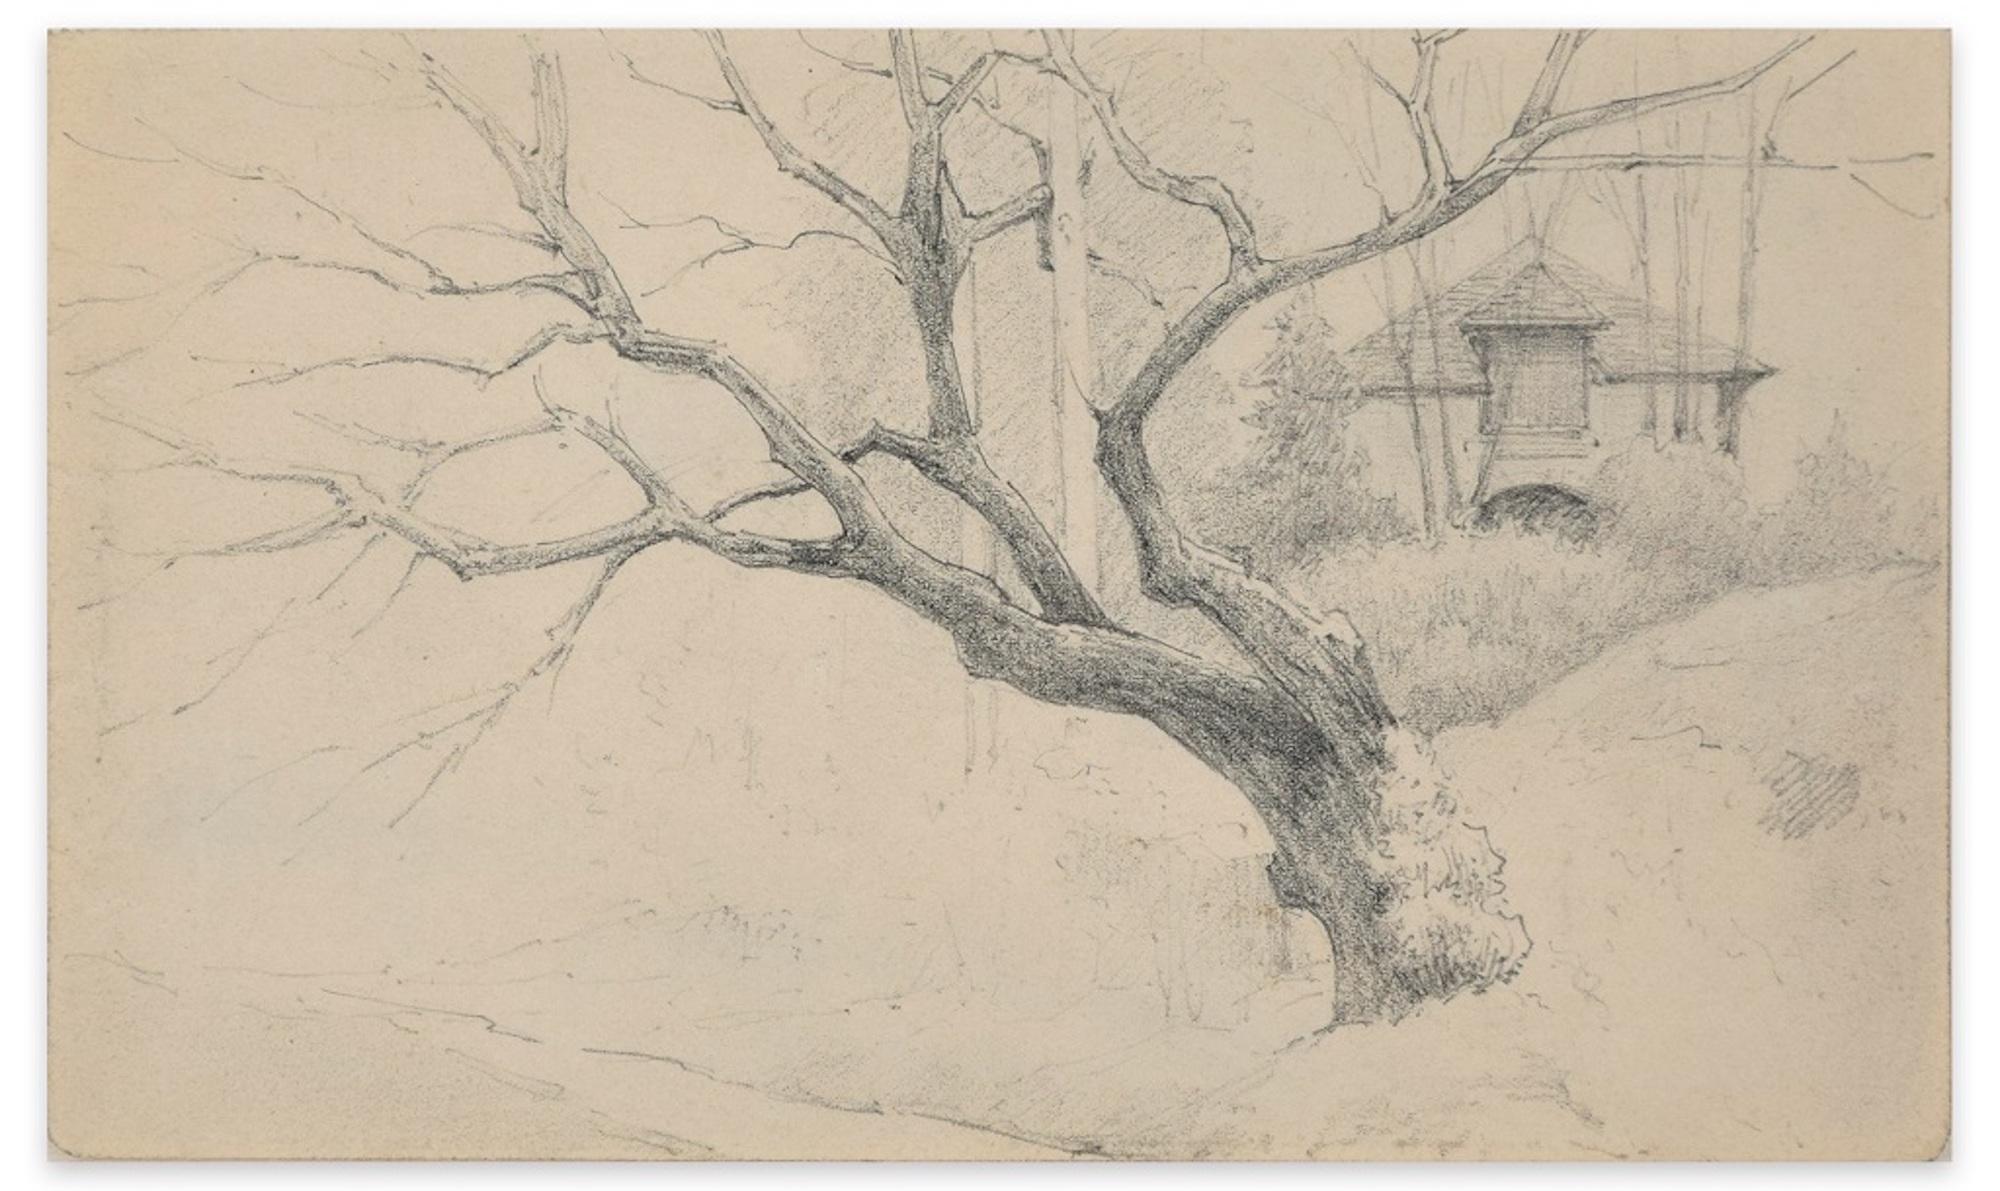 Tree and House - Charcoal by E.-L. Minet - Early 1900